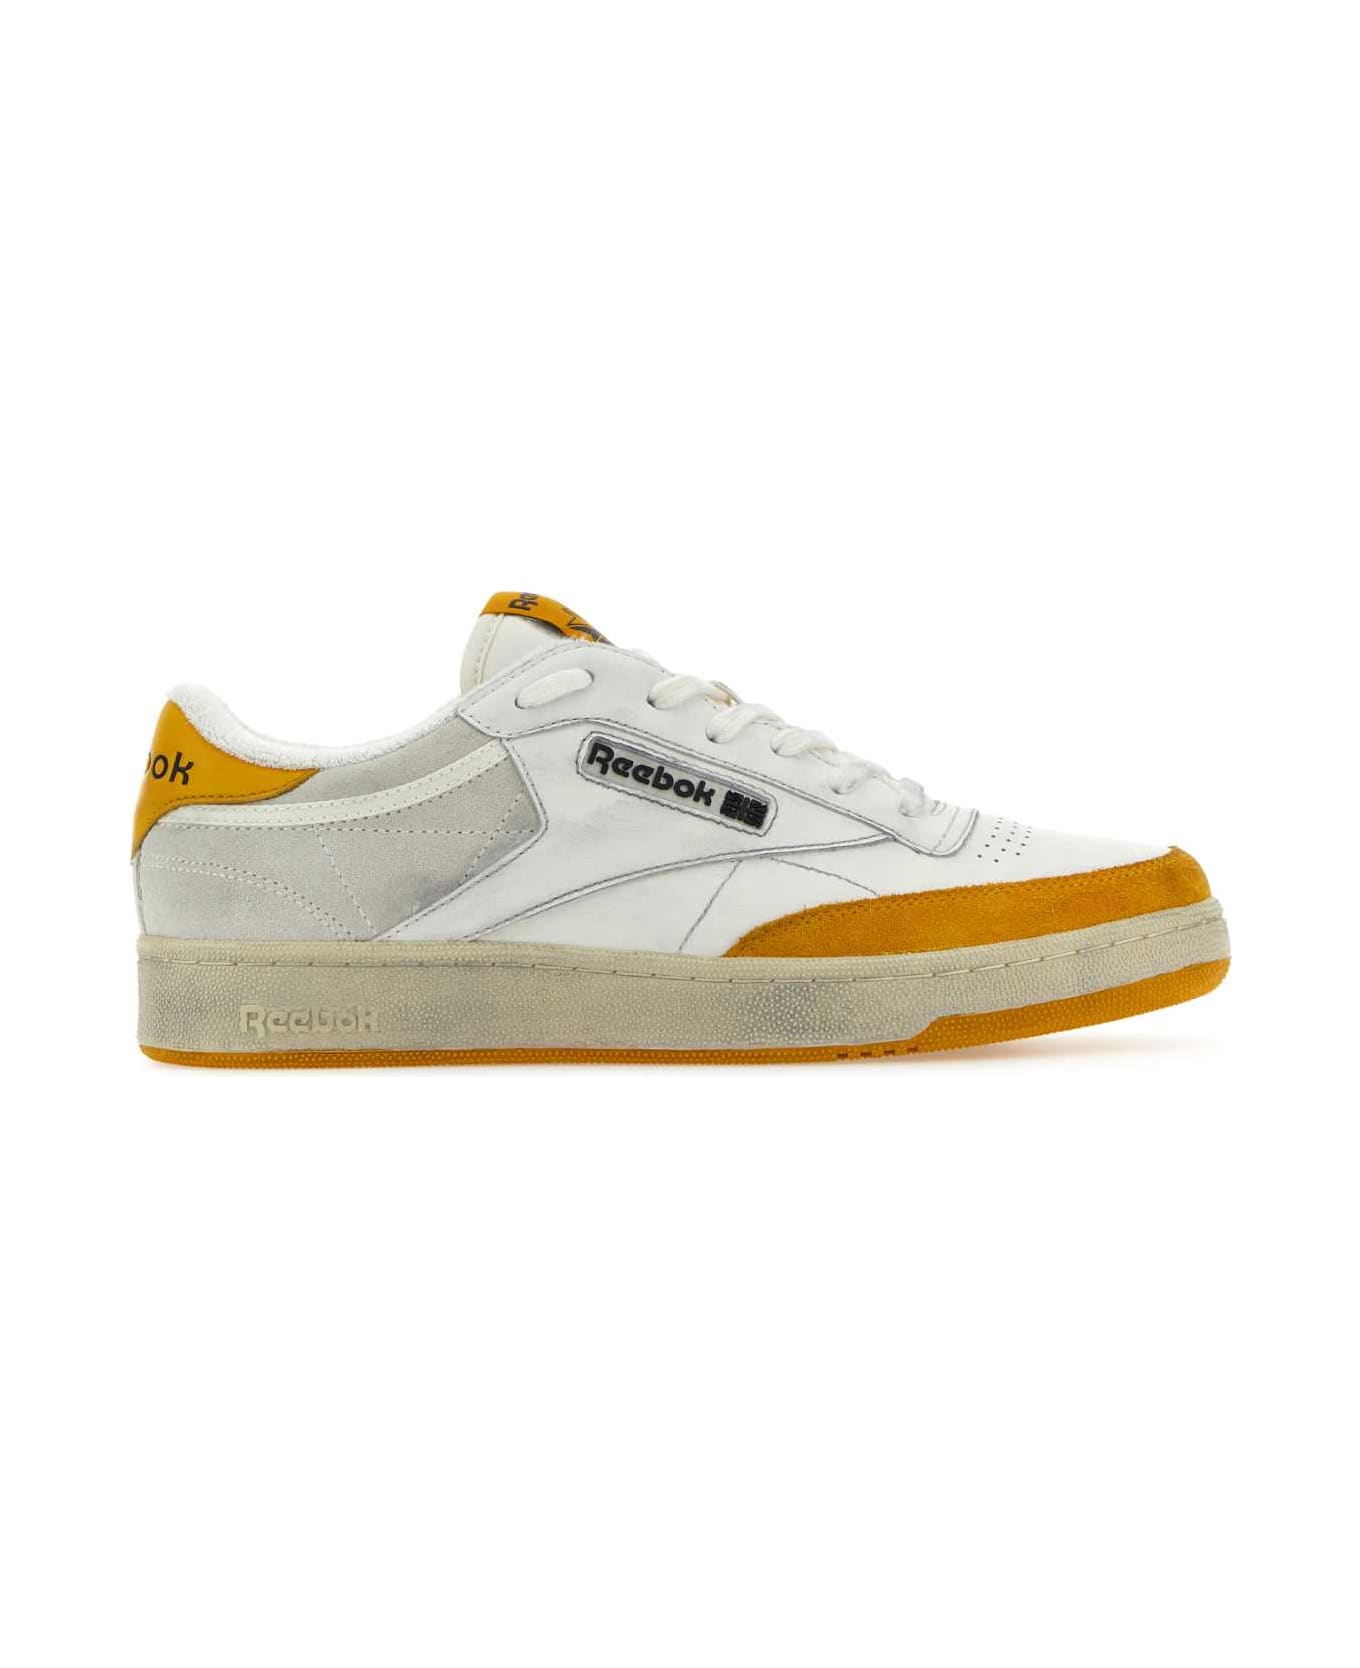 Reebok Two-tone Leather And Suede Club C Sneakers - WHITEORAN スニーカー